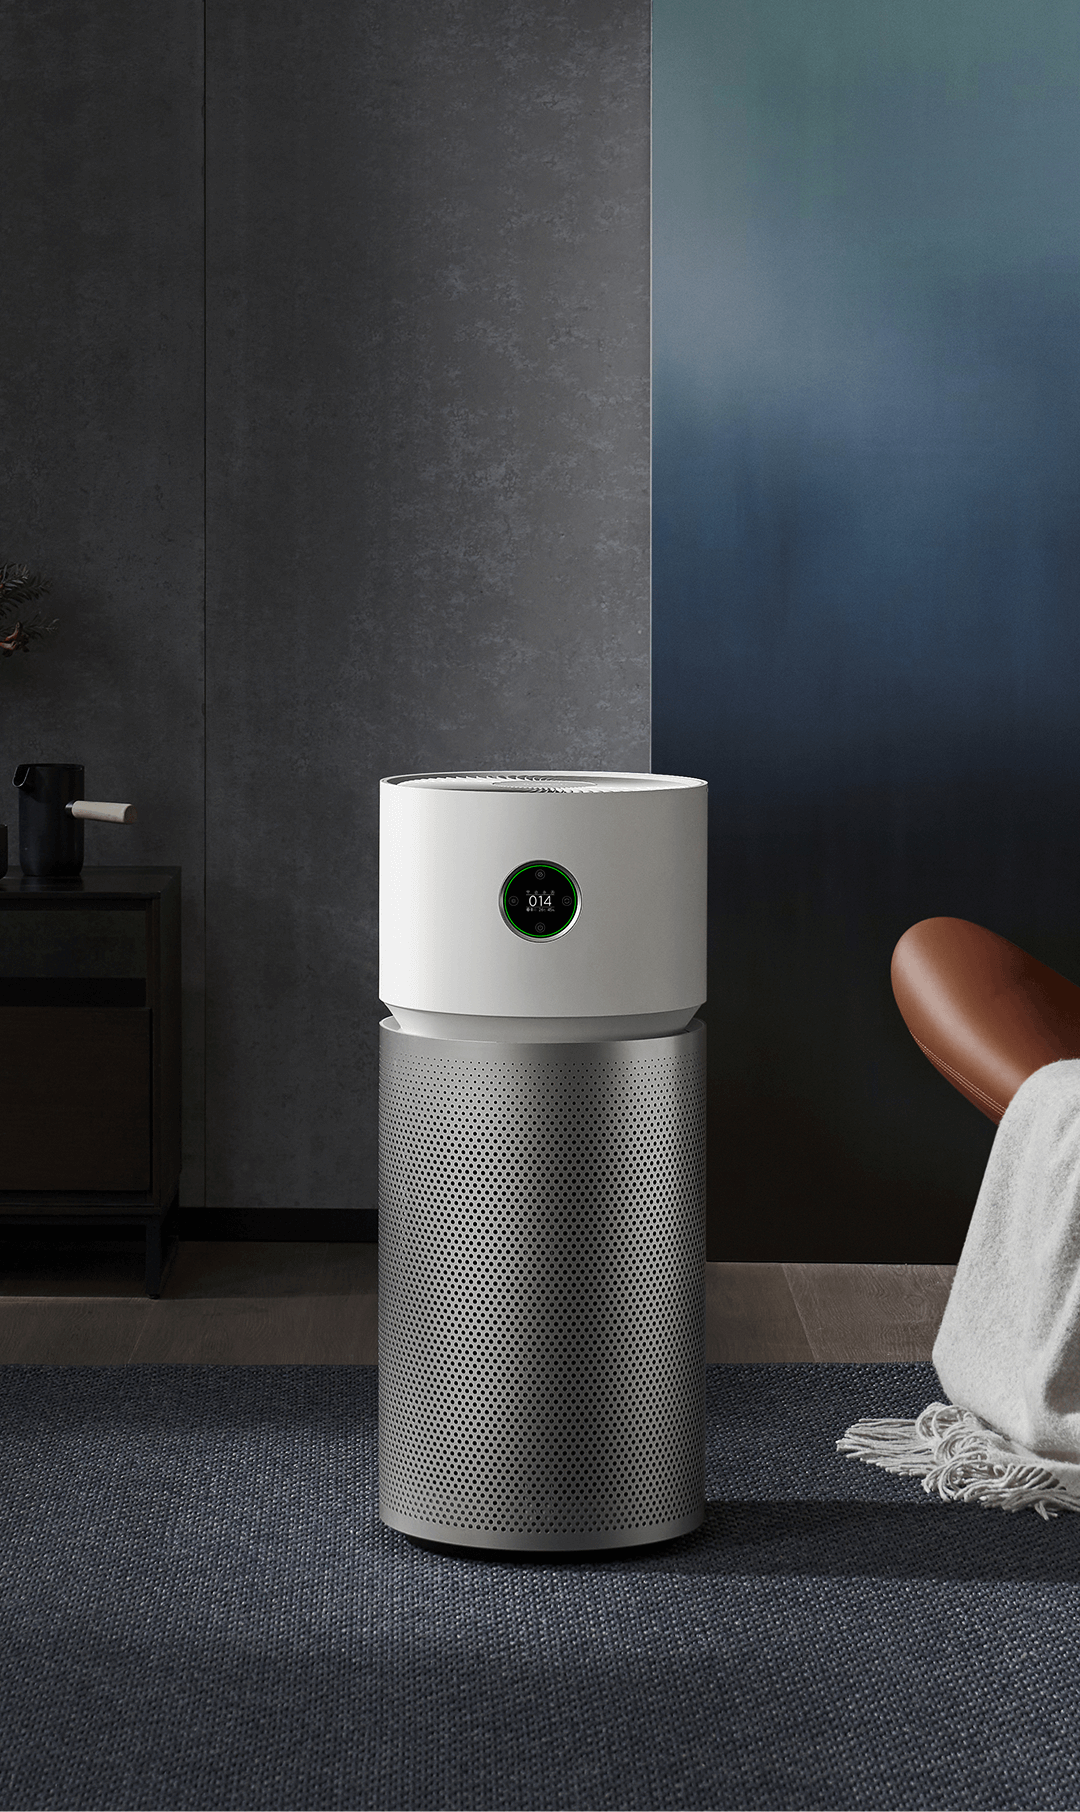  New Xiaomi Mi Air Purifier 2S for Formaldehyde cleaning  Intelligent Household Hepa Filter Smart APP WIFI RC: Home & Kitchen